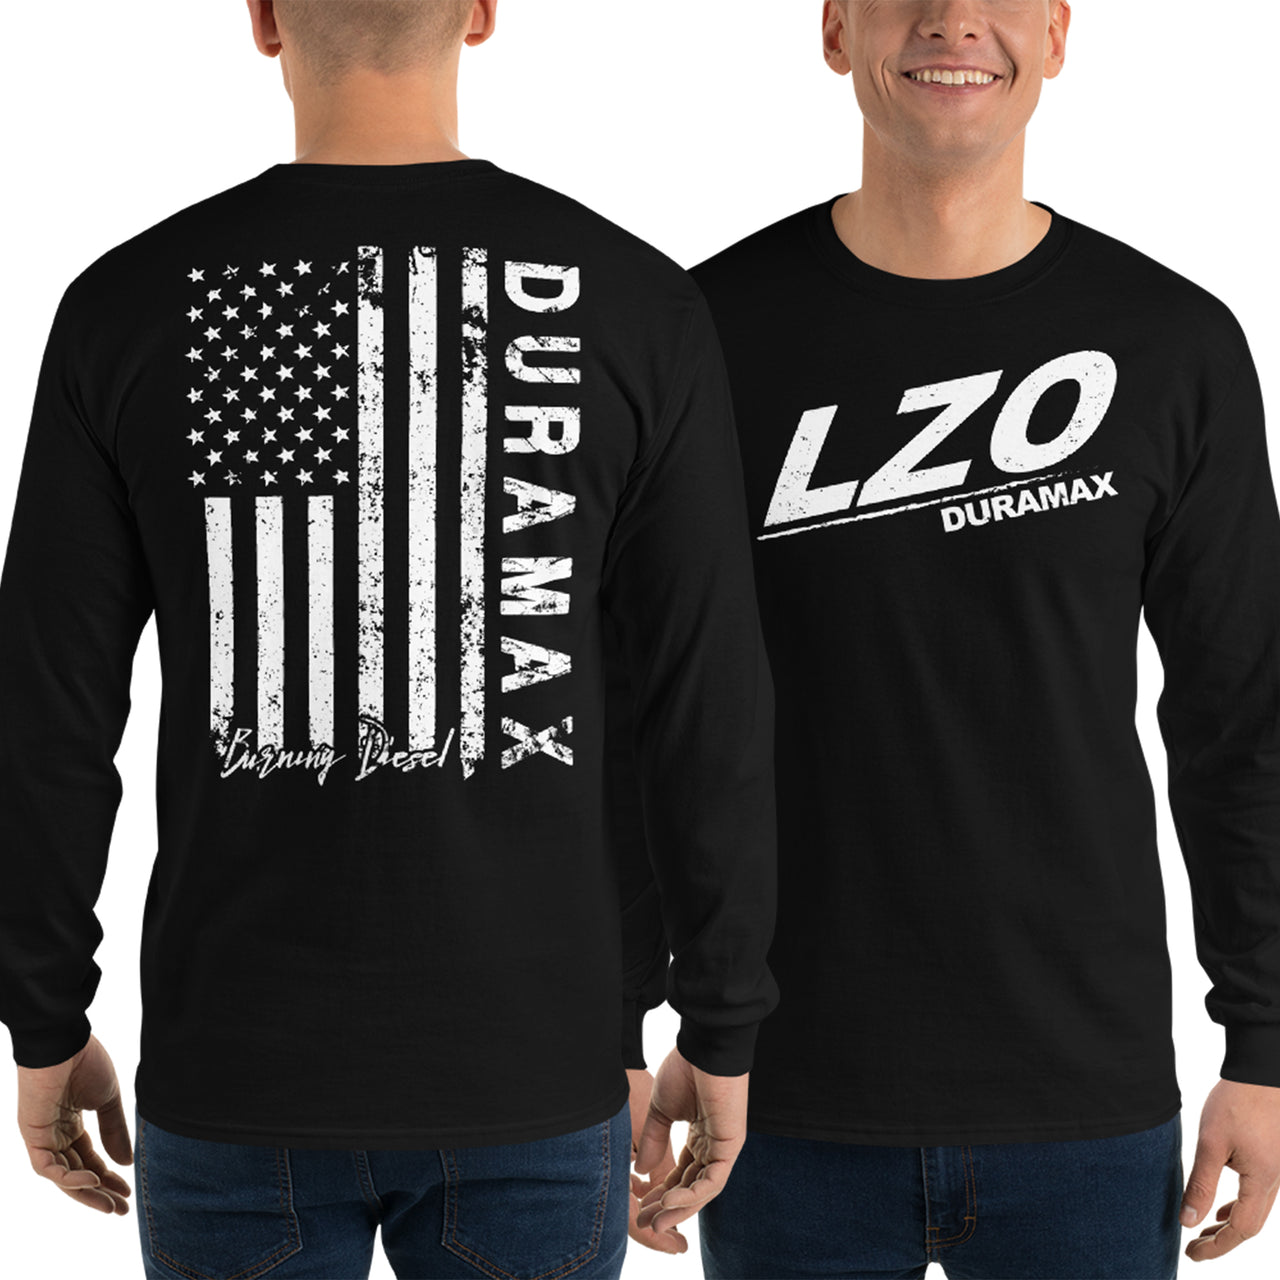 LZO Duramax Long Sleeve Shirt With American Flag Design modeled in black